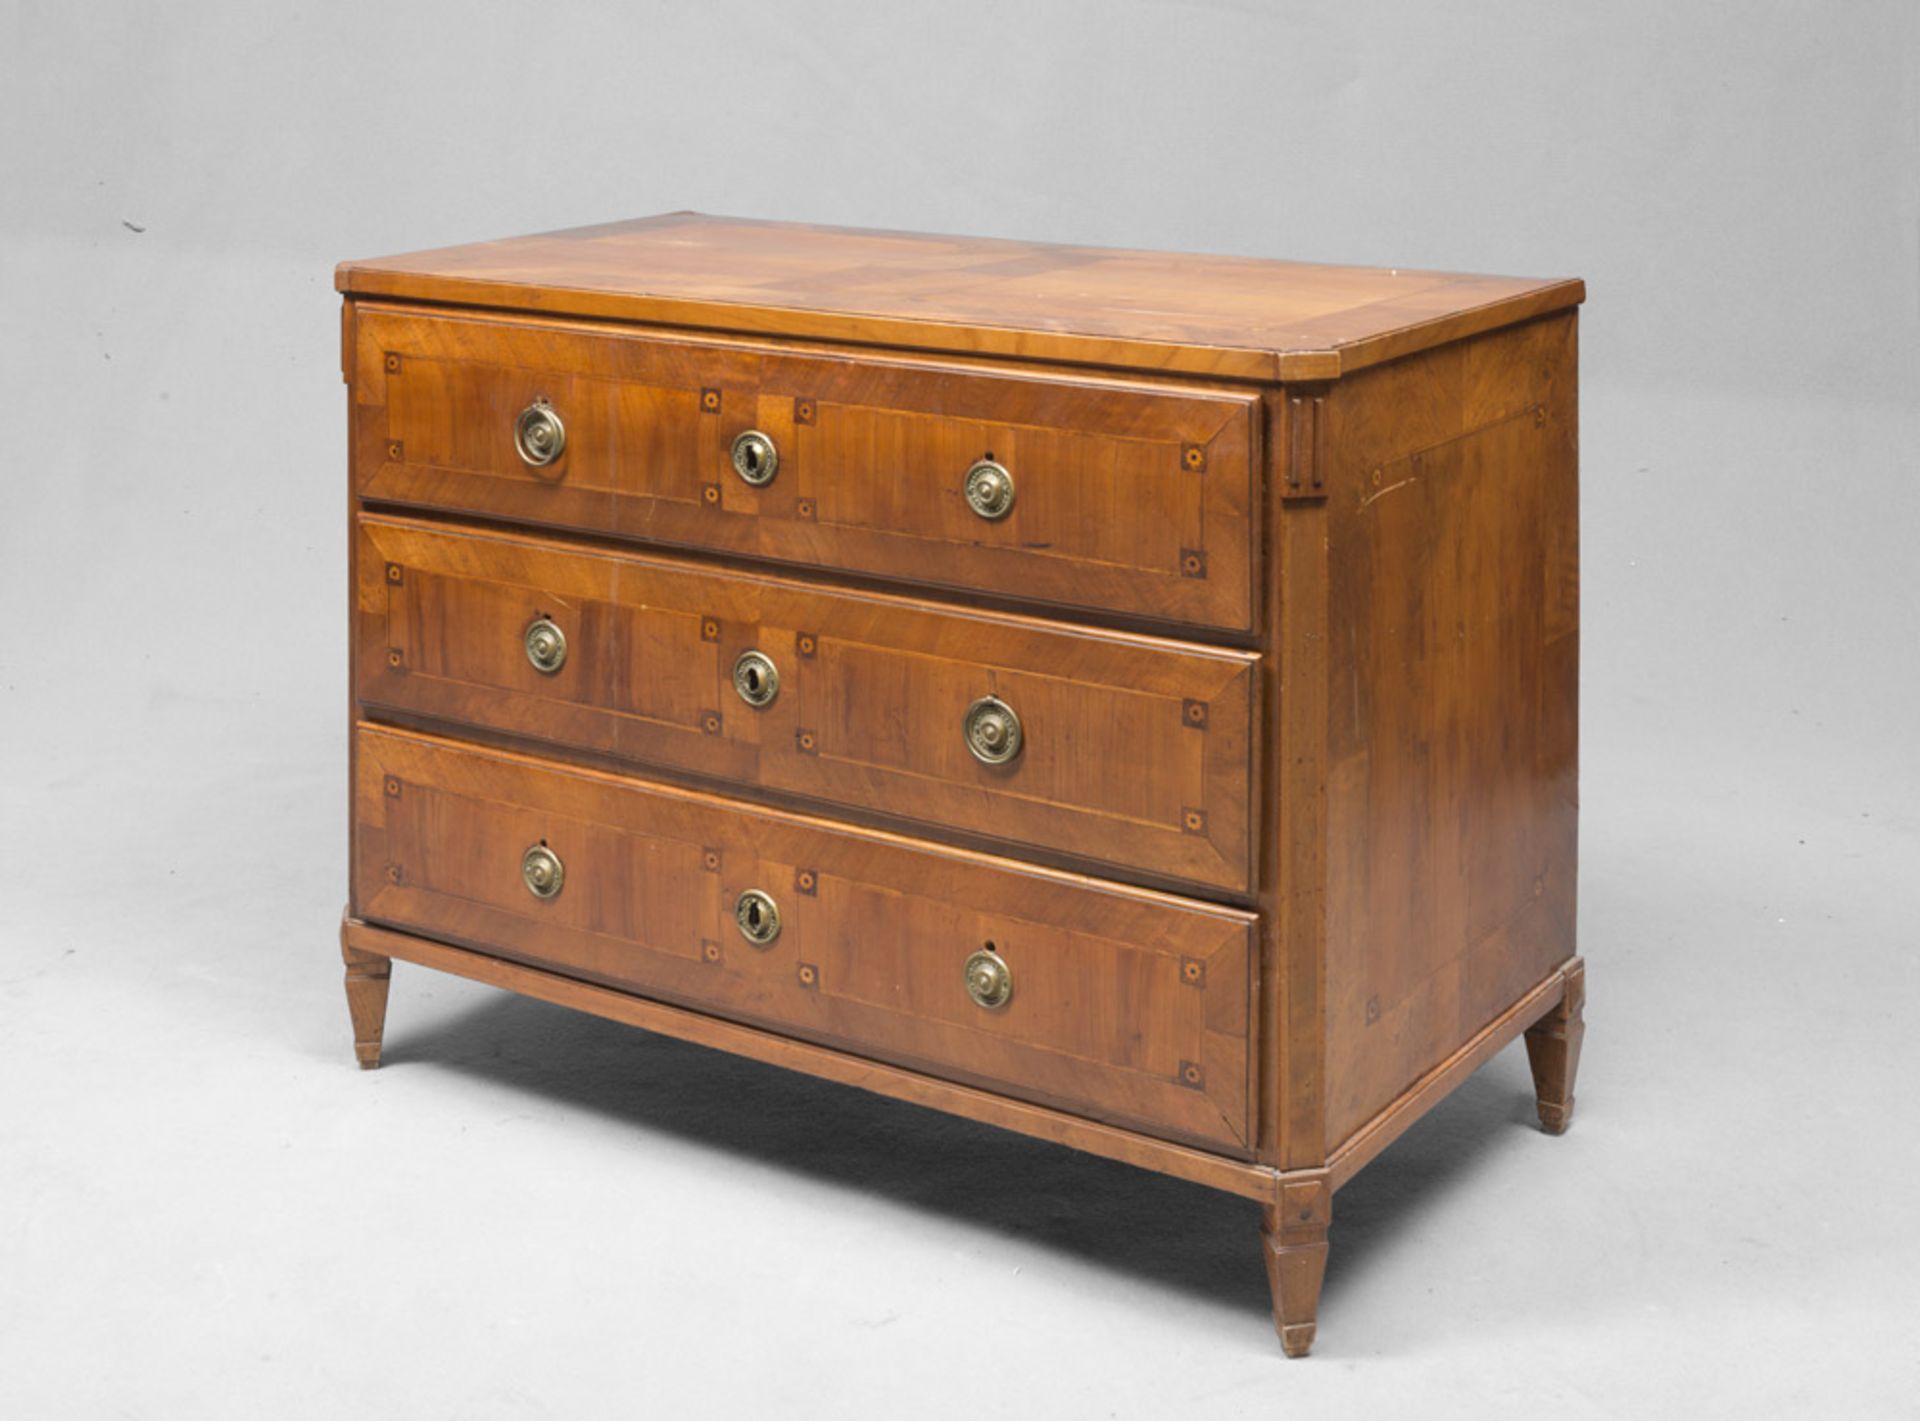 Cherry-wood Commode with maple and violet ebony inlays, period of the Biedermaier. Measures cm. 92 x